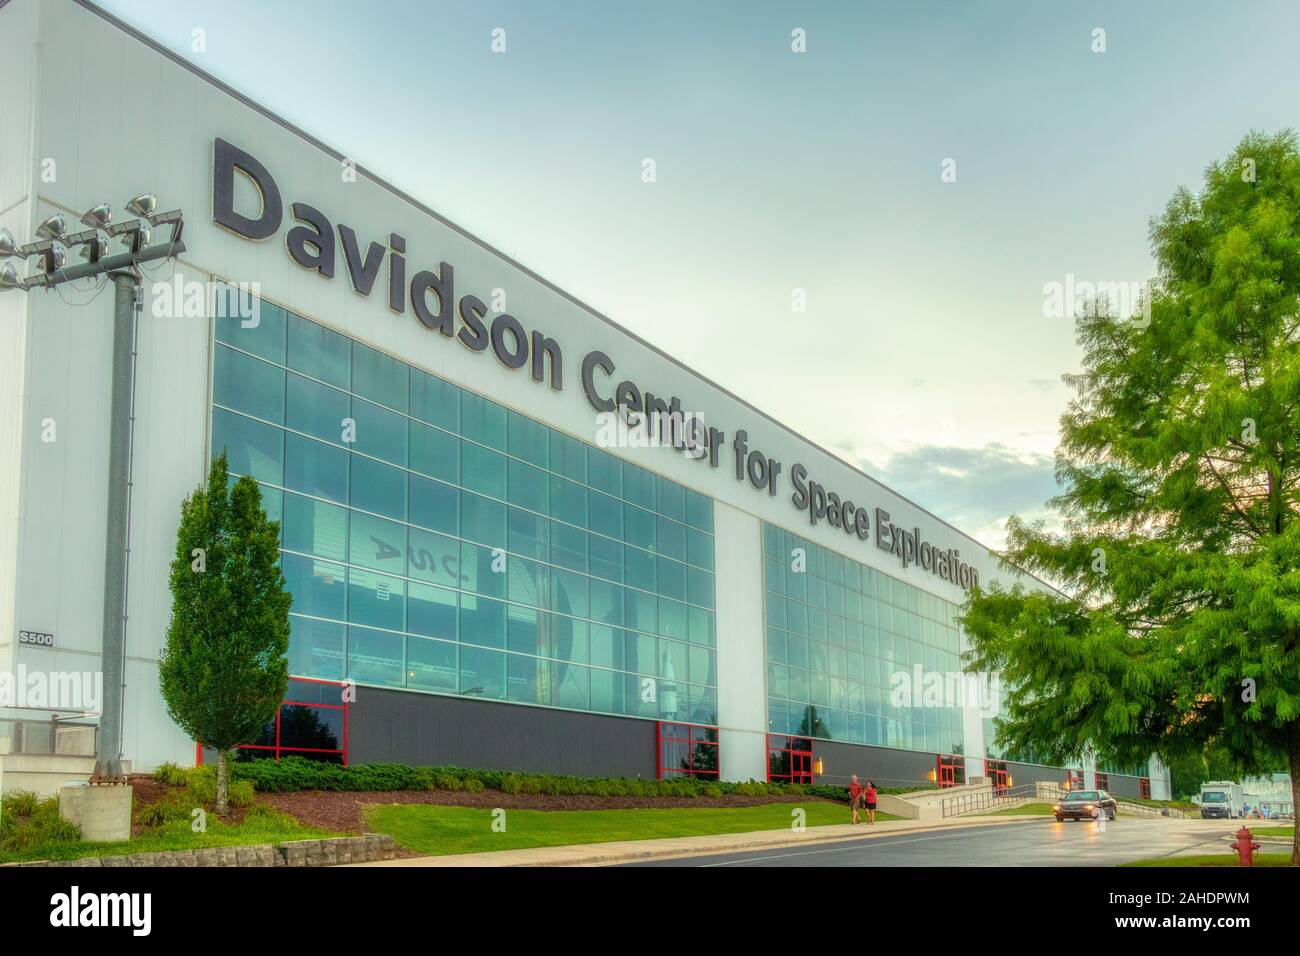 The Davidson Center for Space Exploration is a two-story, 76,000 square foot facility designed to showcase the Saturn V rocket. Stock Photo